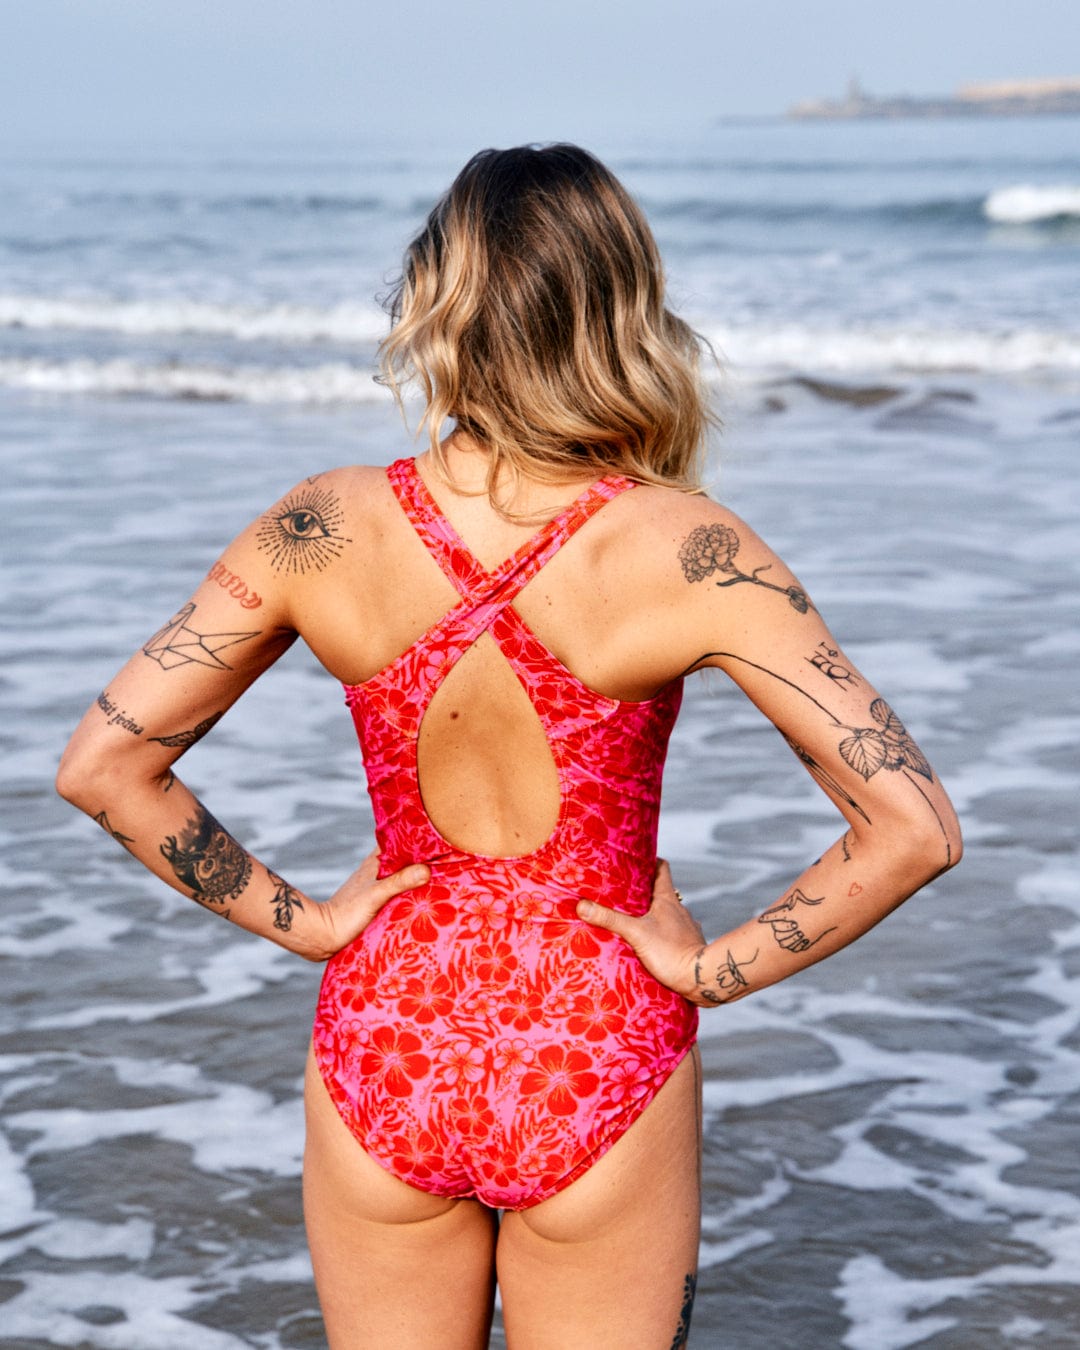 A woman in a red full piece swimsuit with Corrine Hibiscus print and visible tattoos stands on a beach, looking towards the sea.